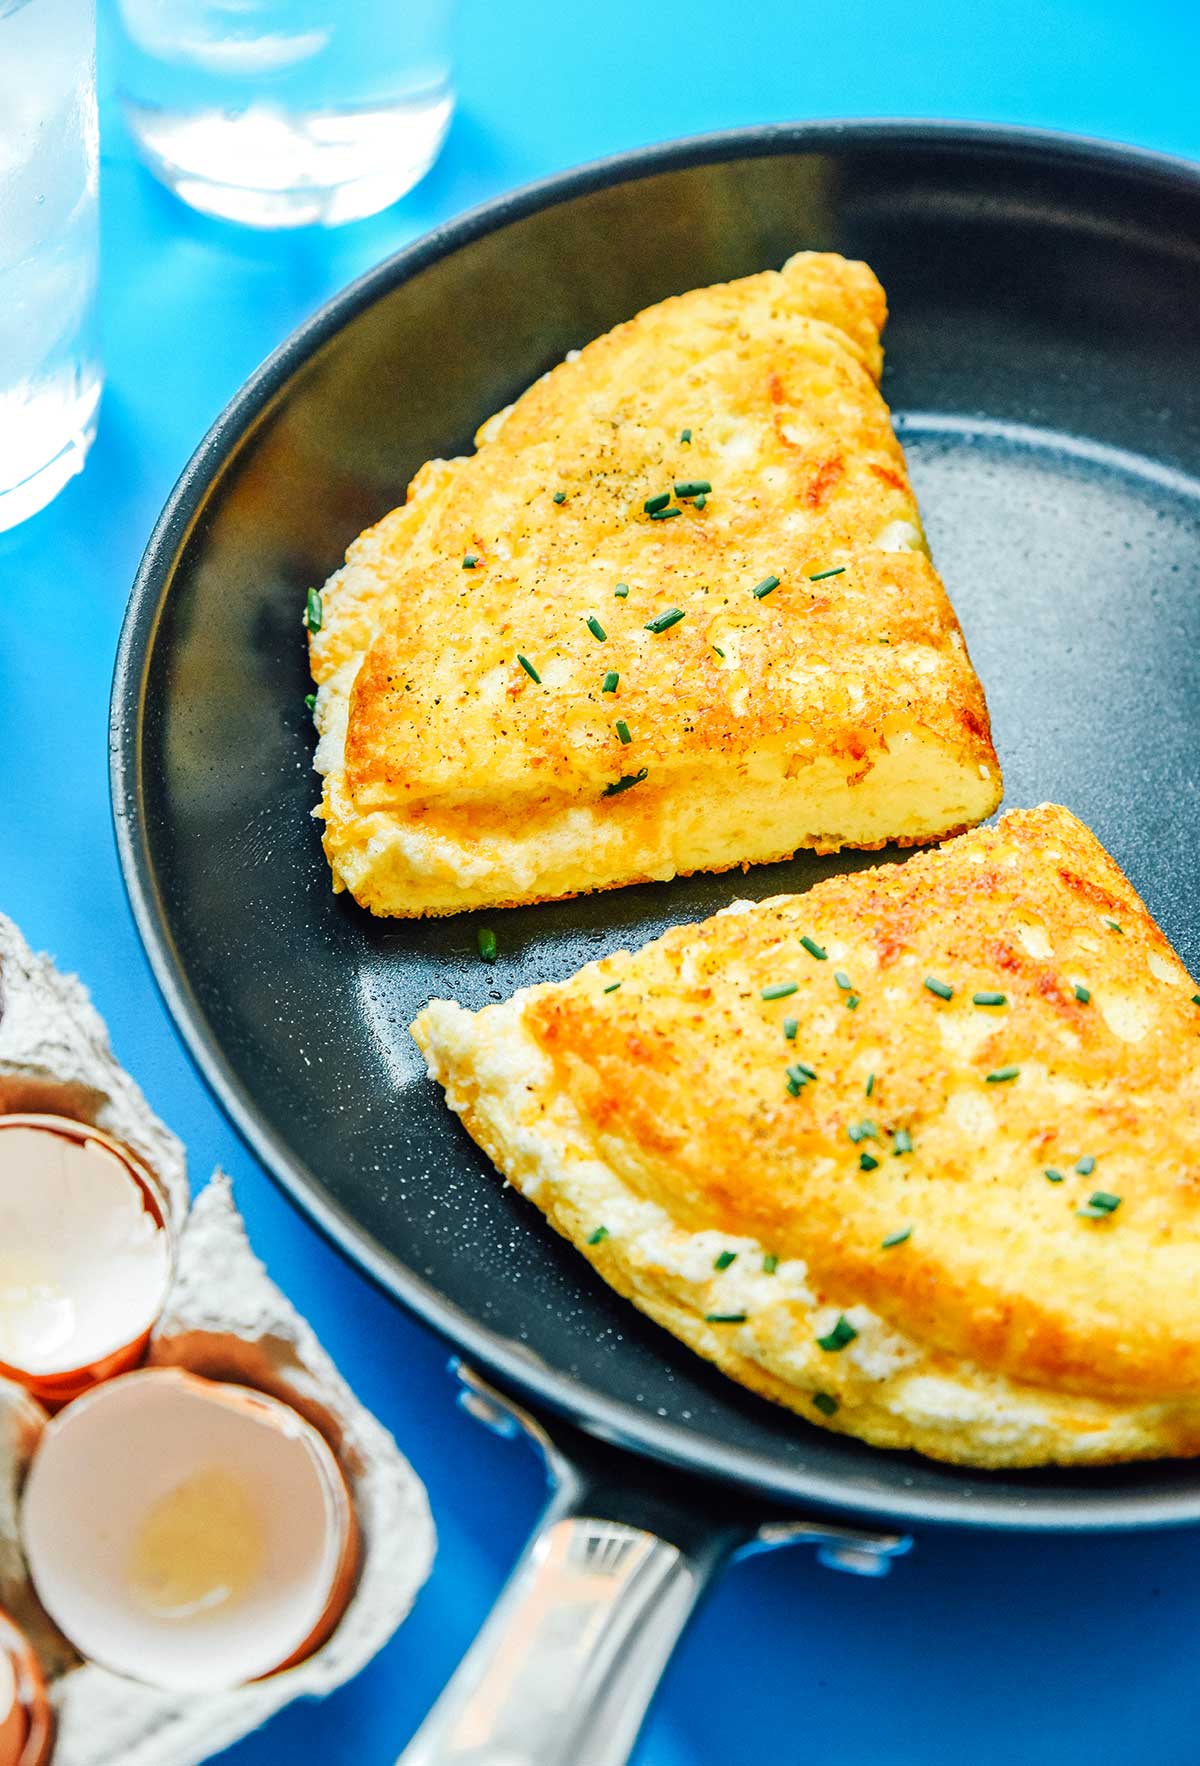 Two halves of a folded, fluffy soufflé omelette in a skillet